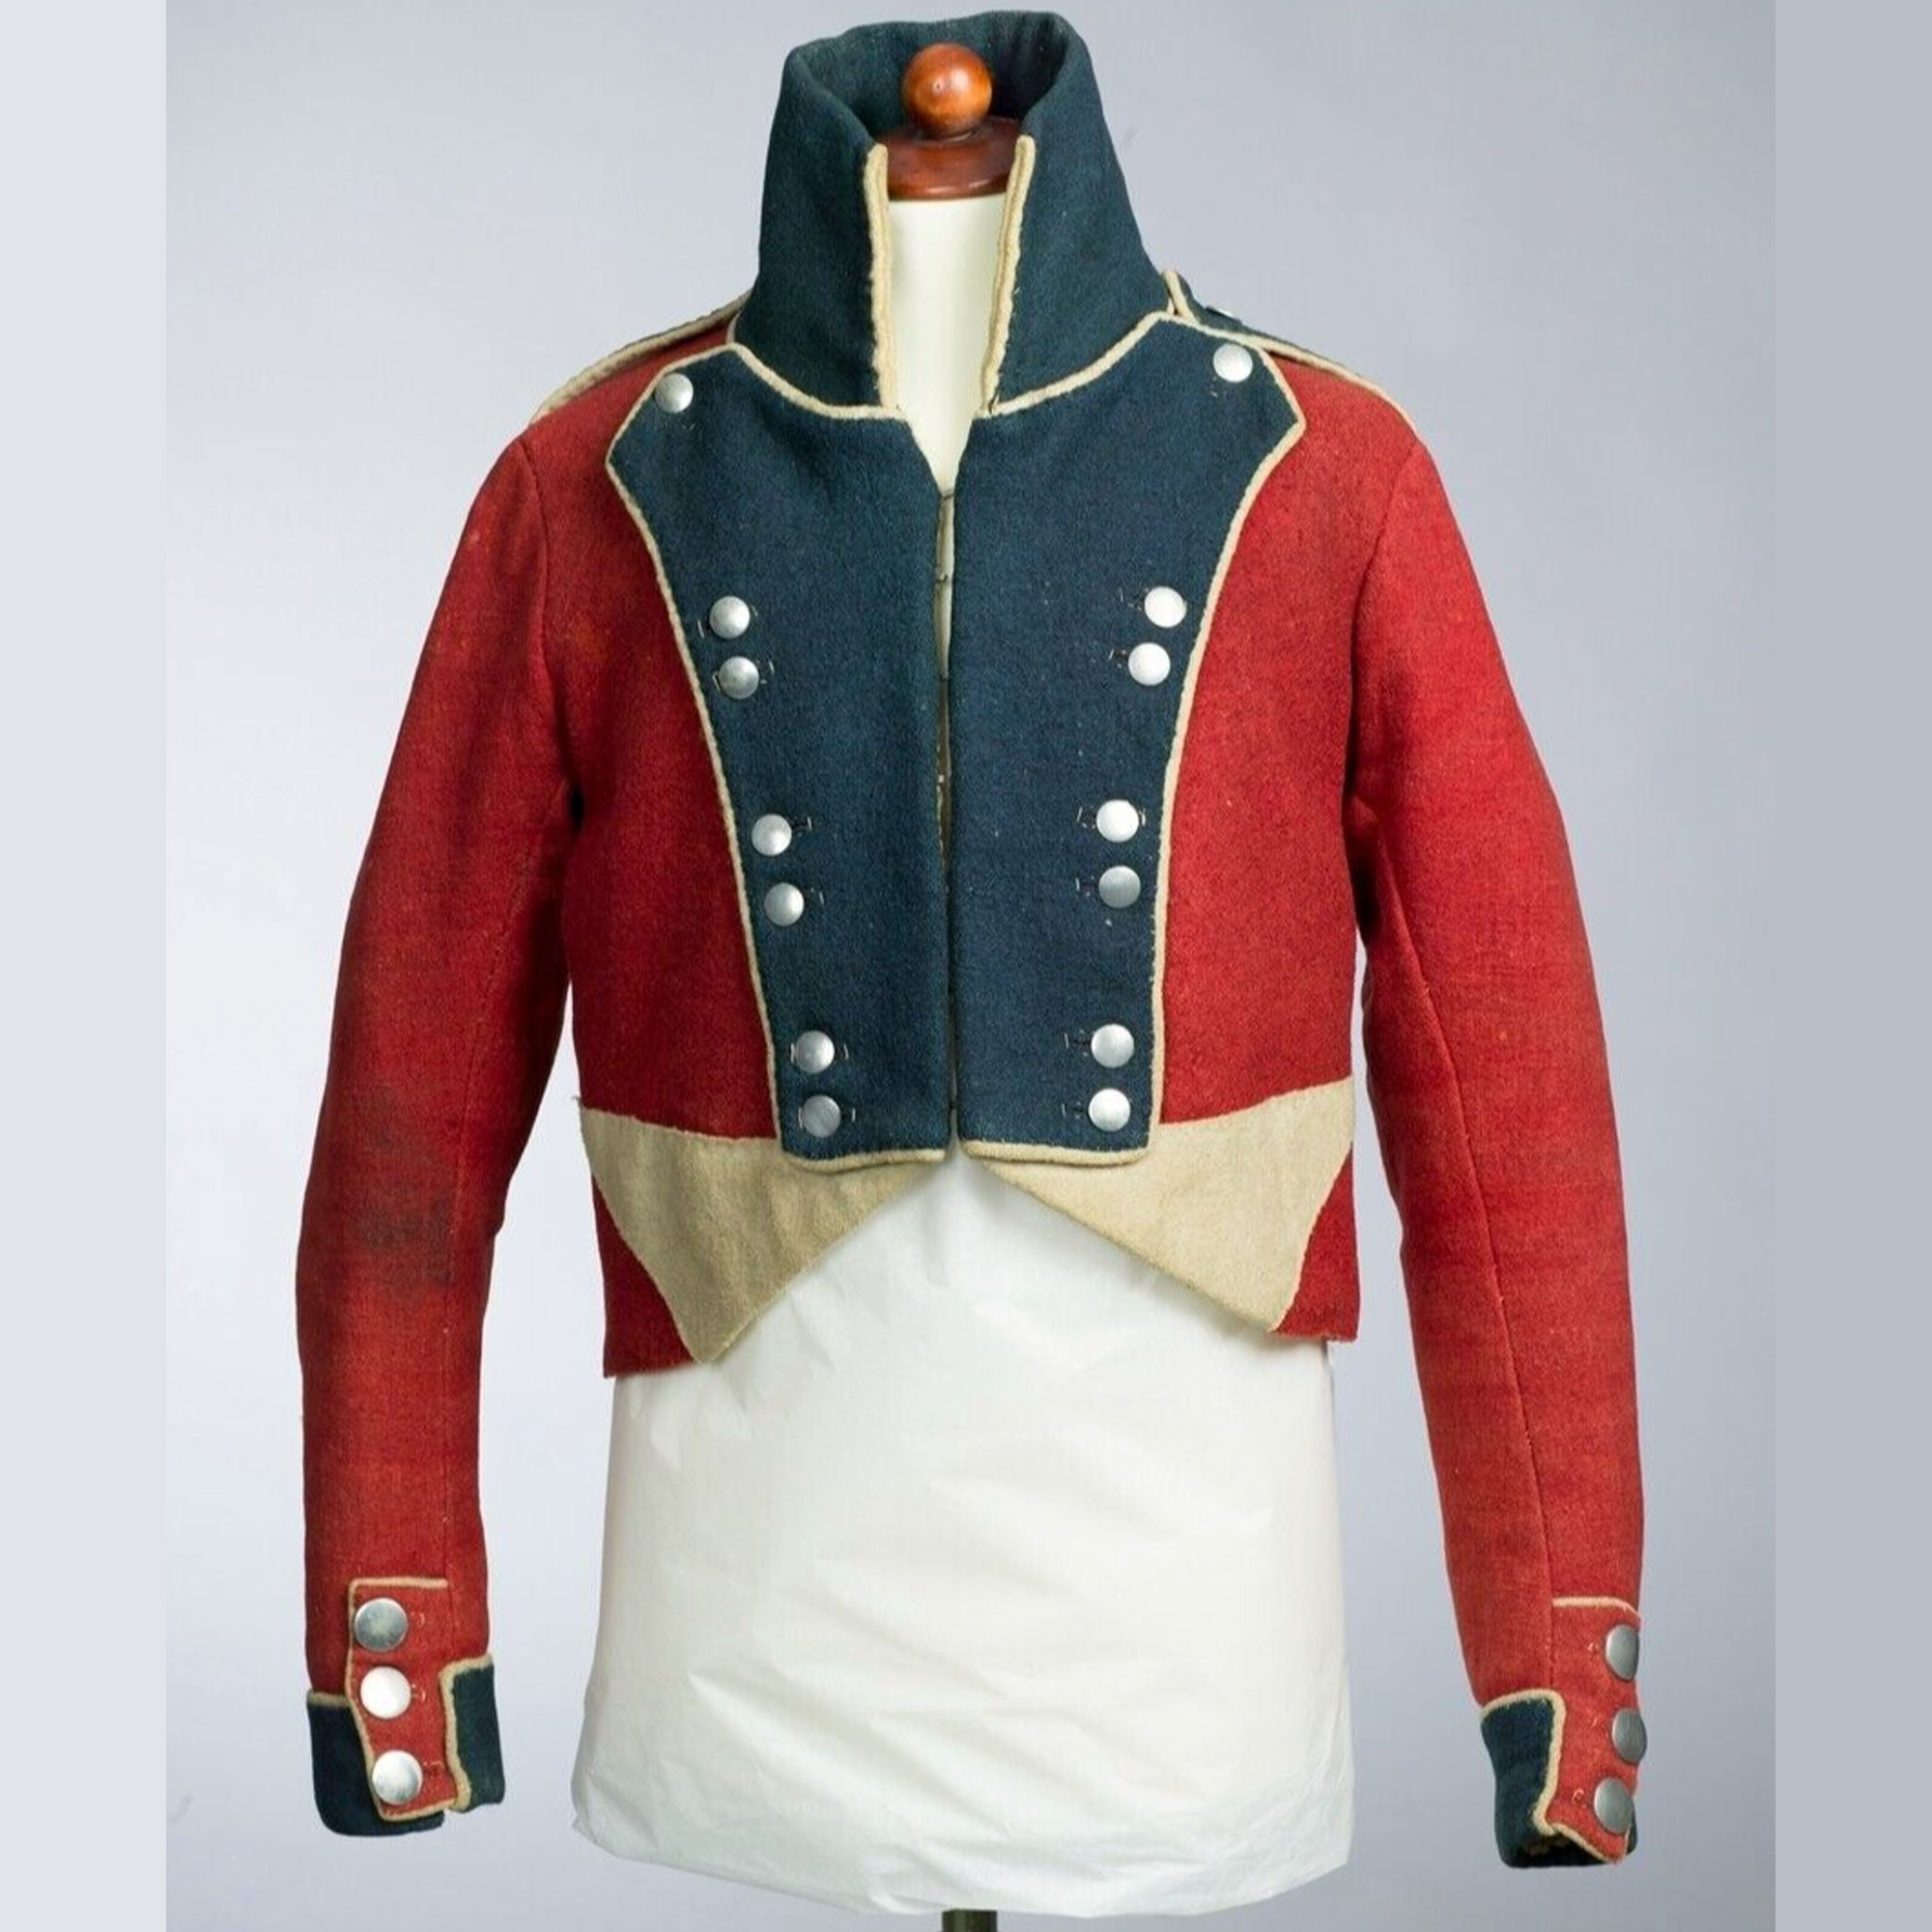 New 1814 Army Soldier Uniform Red With Green Lapel Wool Men Jacket - 471